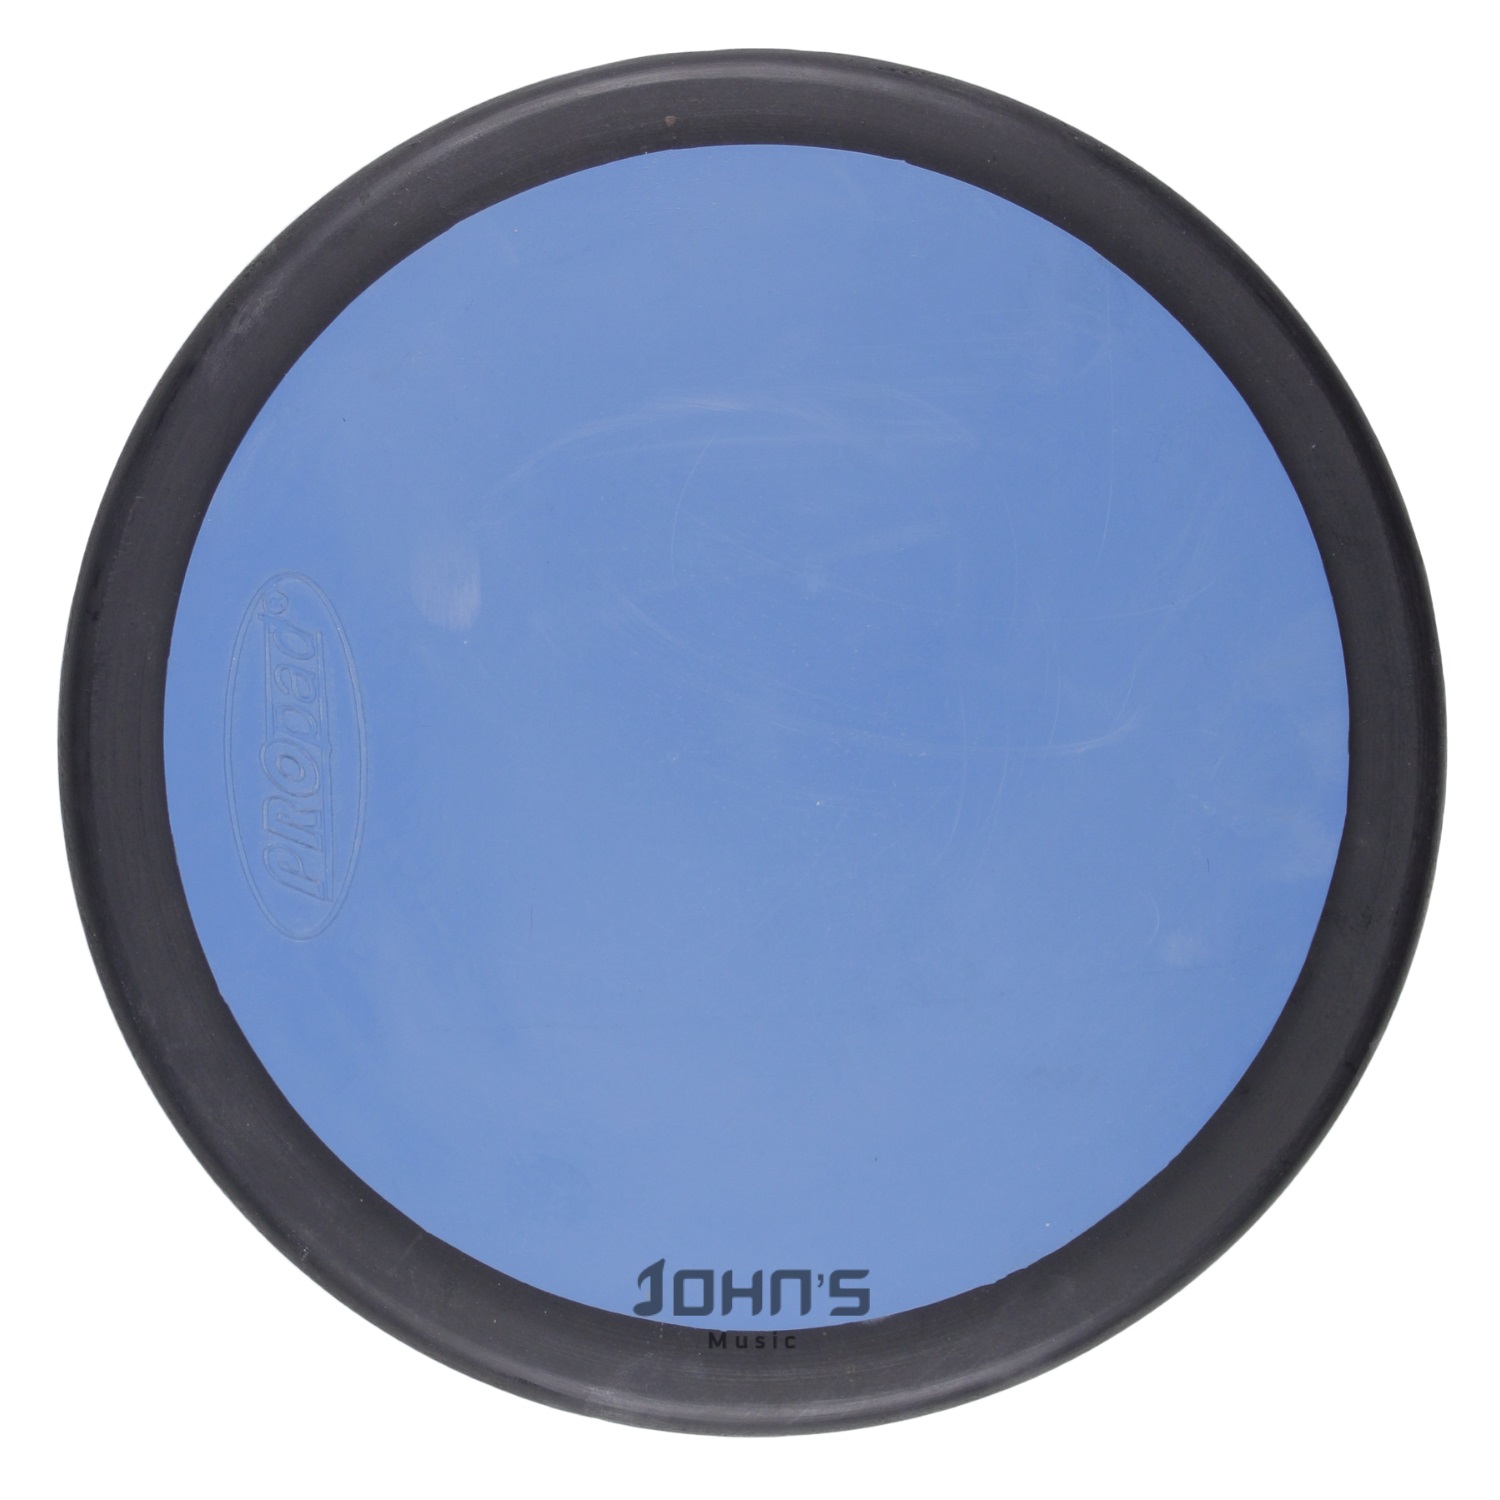 Drum practice pad for beginners 10 inch